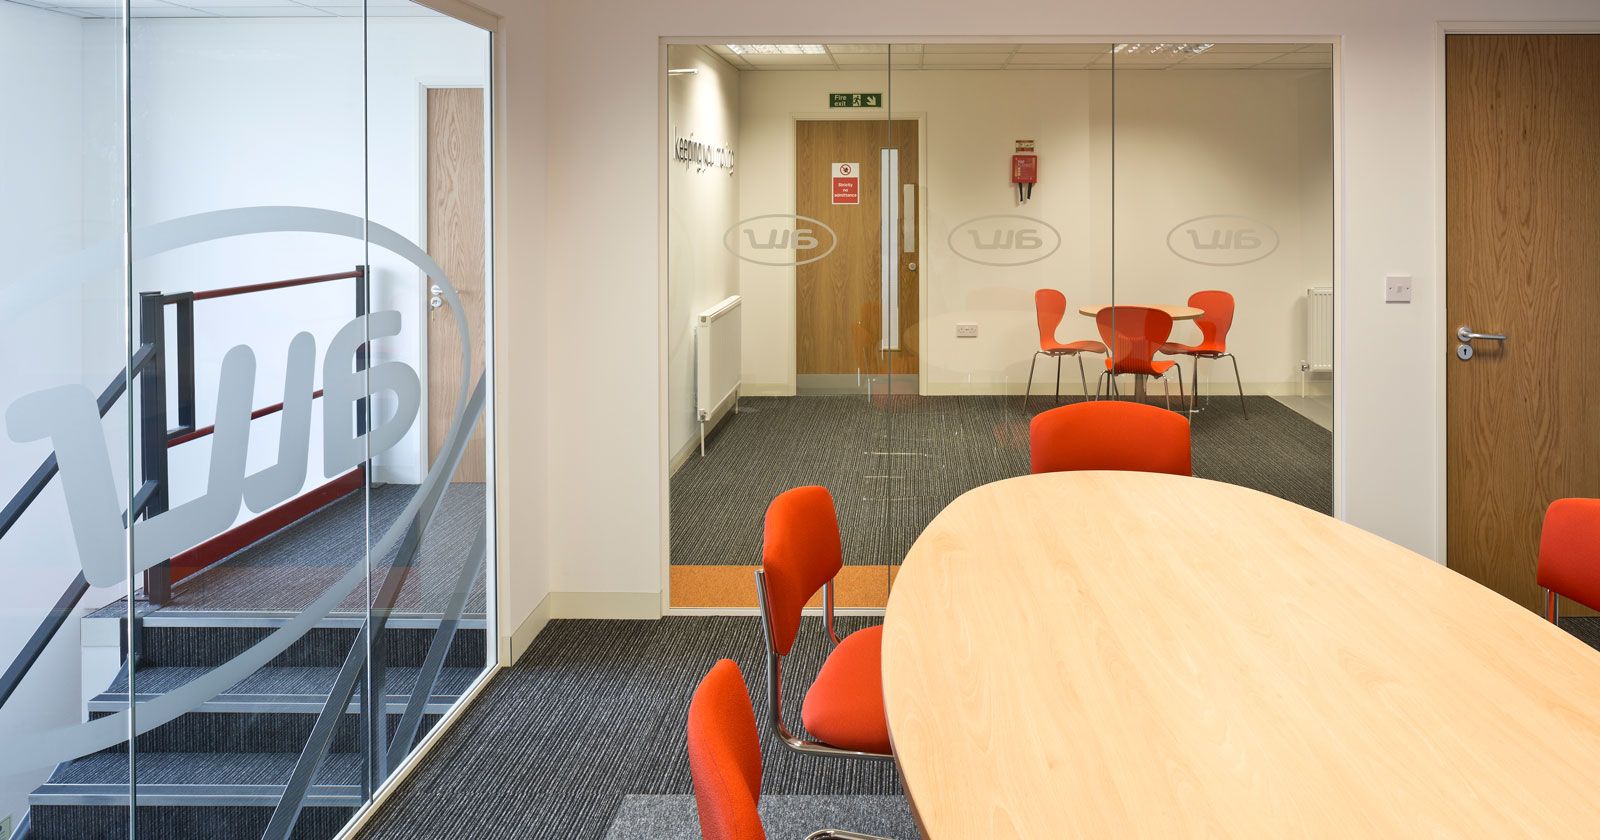 AW Repair Group Office Fit Out Meeting Rooms and Mezzanine installation with office furniture provided by APSS